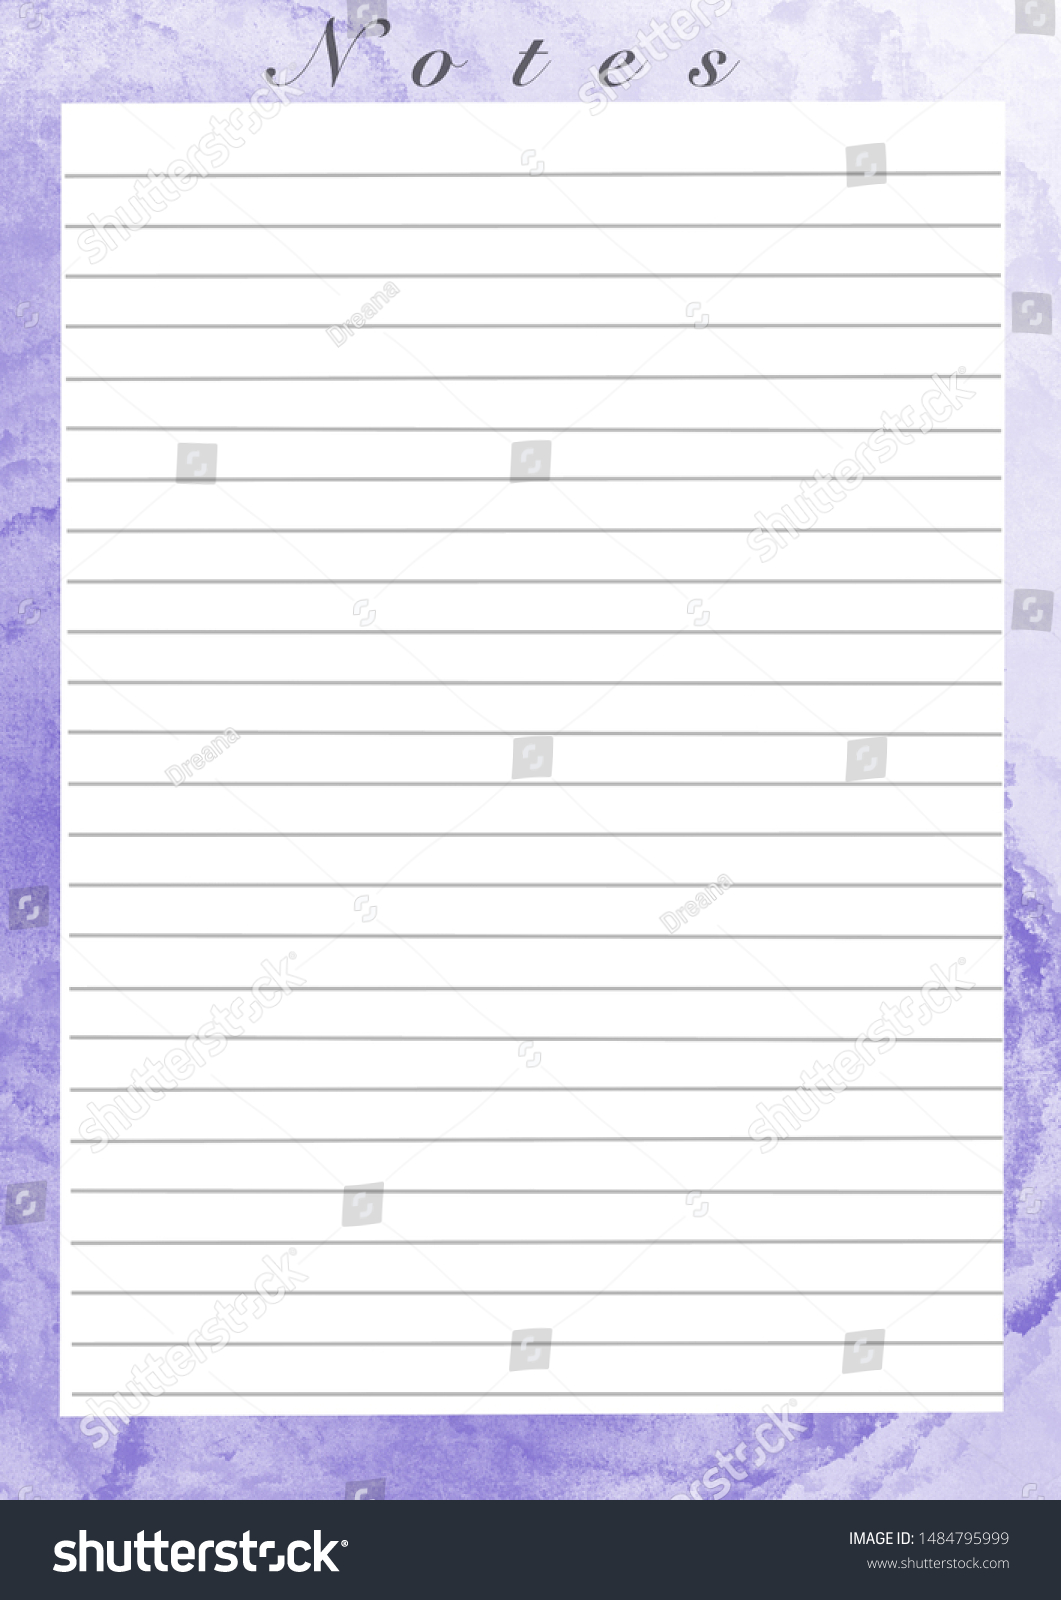 Printing Paper Note Optimal A4 Size Stock Illustration 1484795999 Shutterstock 9390